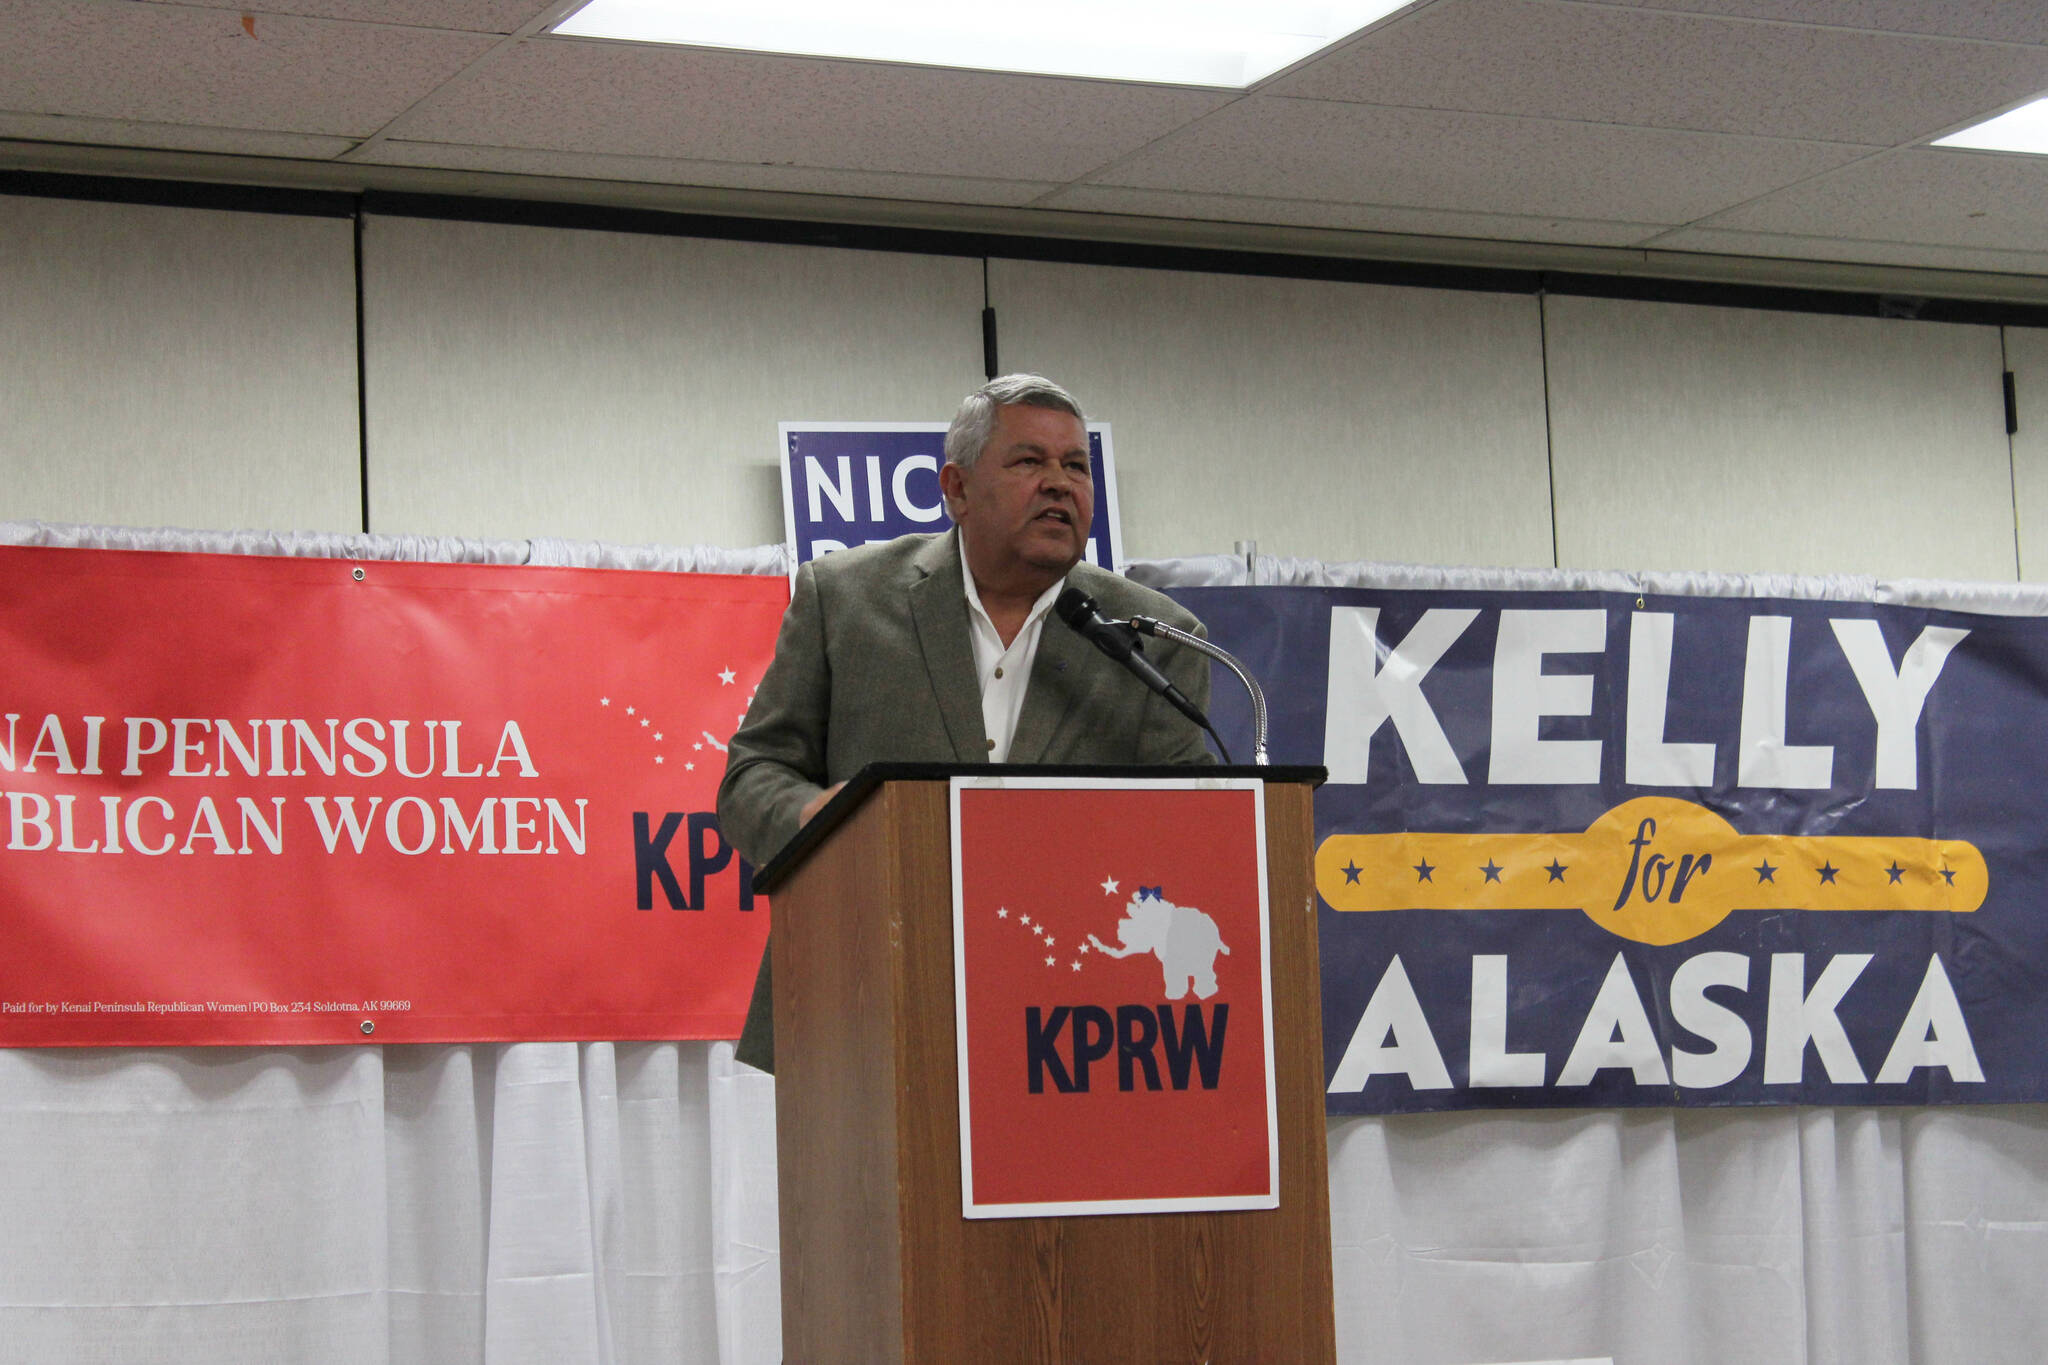 Former Kenai Peninsula Borough Mayor and current Alaska gubernatorial candidate Charlie Pierce speaks at a "Get Out the Vote" rally hosted by the Kenai Peninsula Republican Women at the Soldotna Regional Sports Complex on Tuesday, Oct. 18, 2022 in Soldotna, Alaska. (Ashlyn O’Hara/Peninsula Clarion)